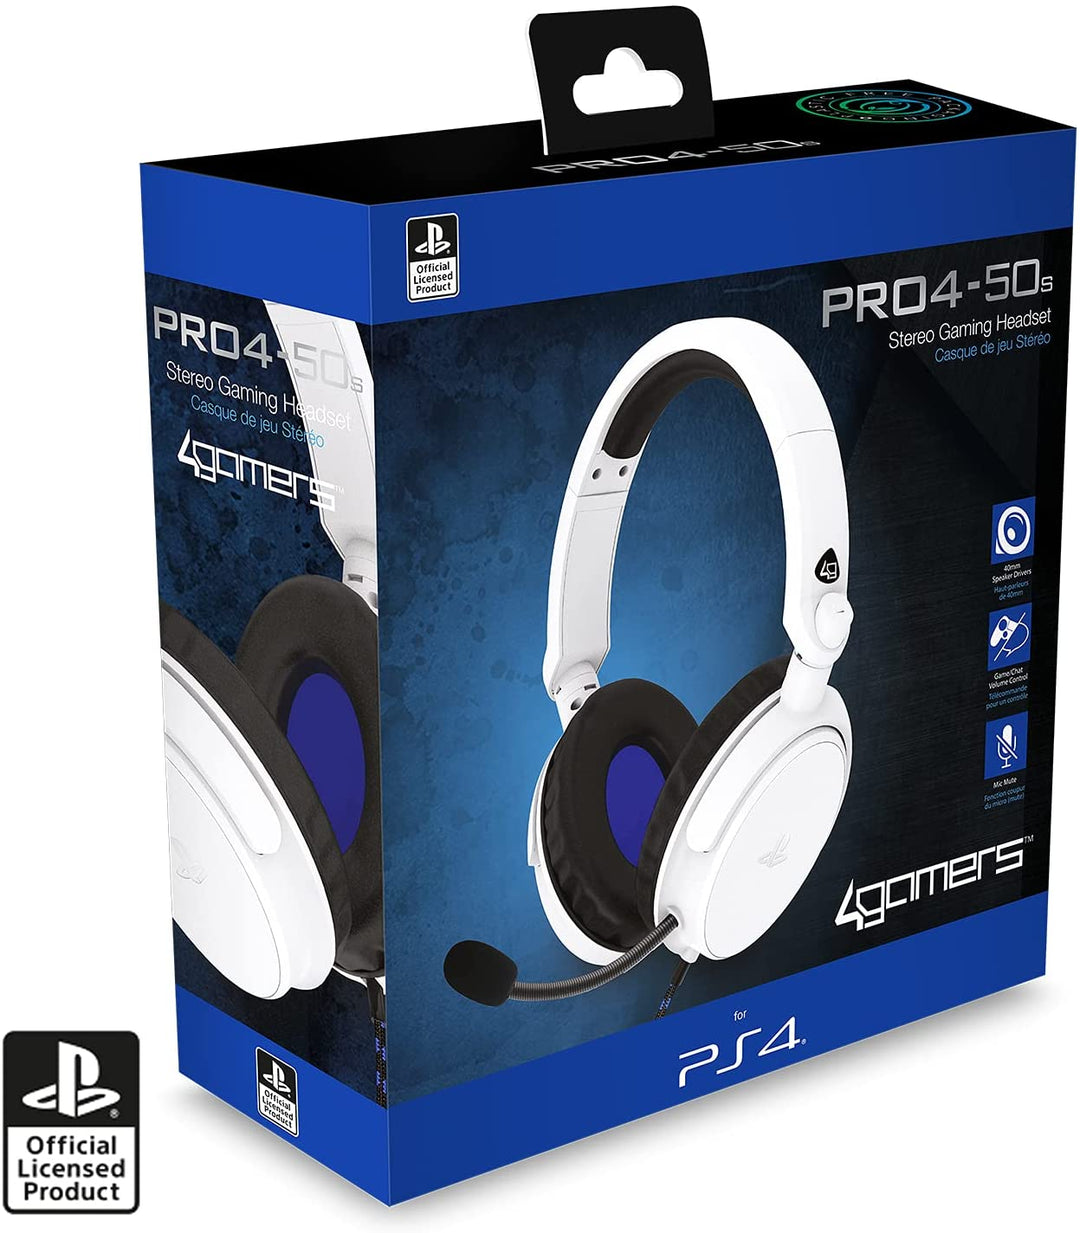 4Gamers PRO4-50s offiziell lizenziertes Stereo-Gaming-Headset für PS4 – Weiß